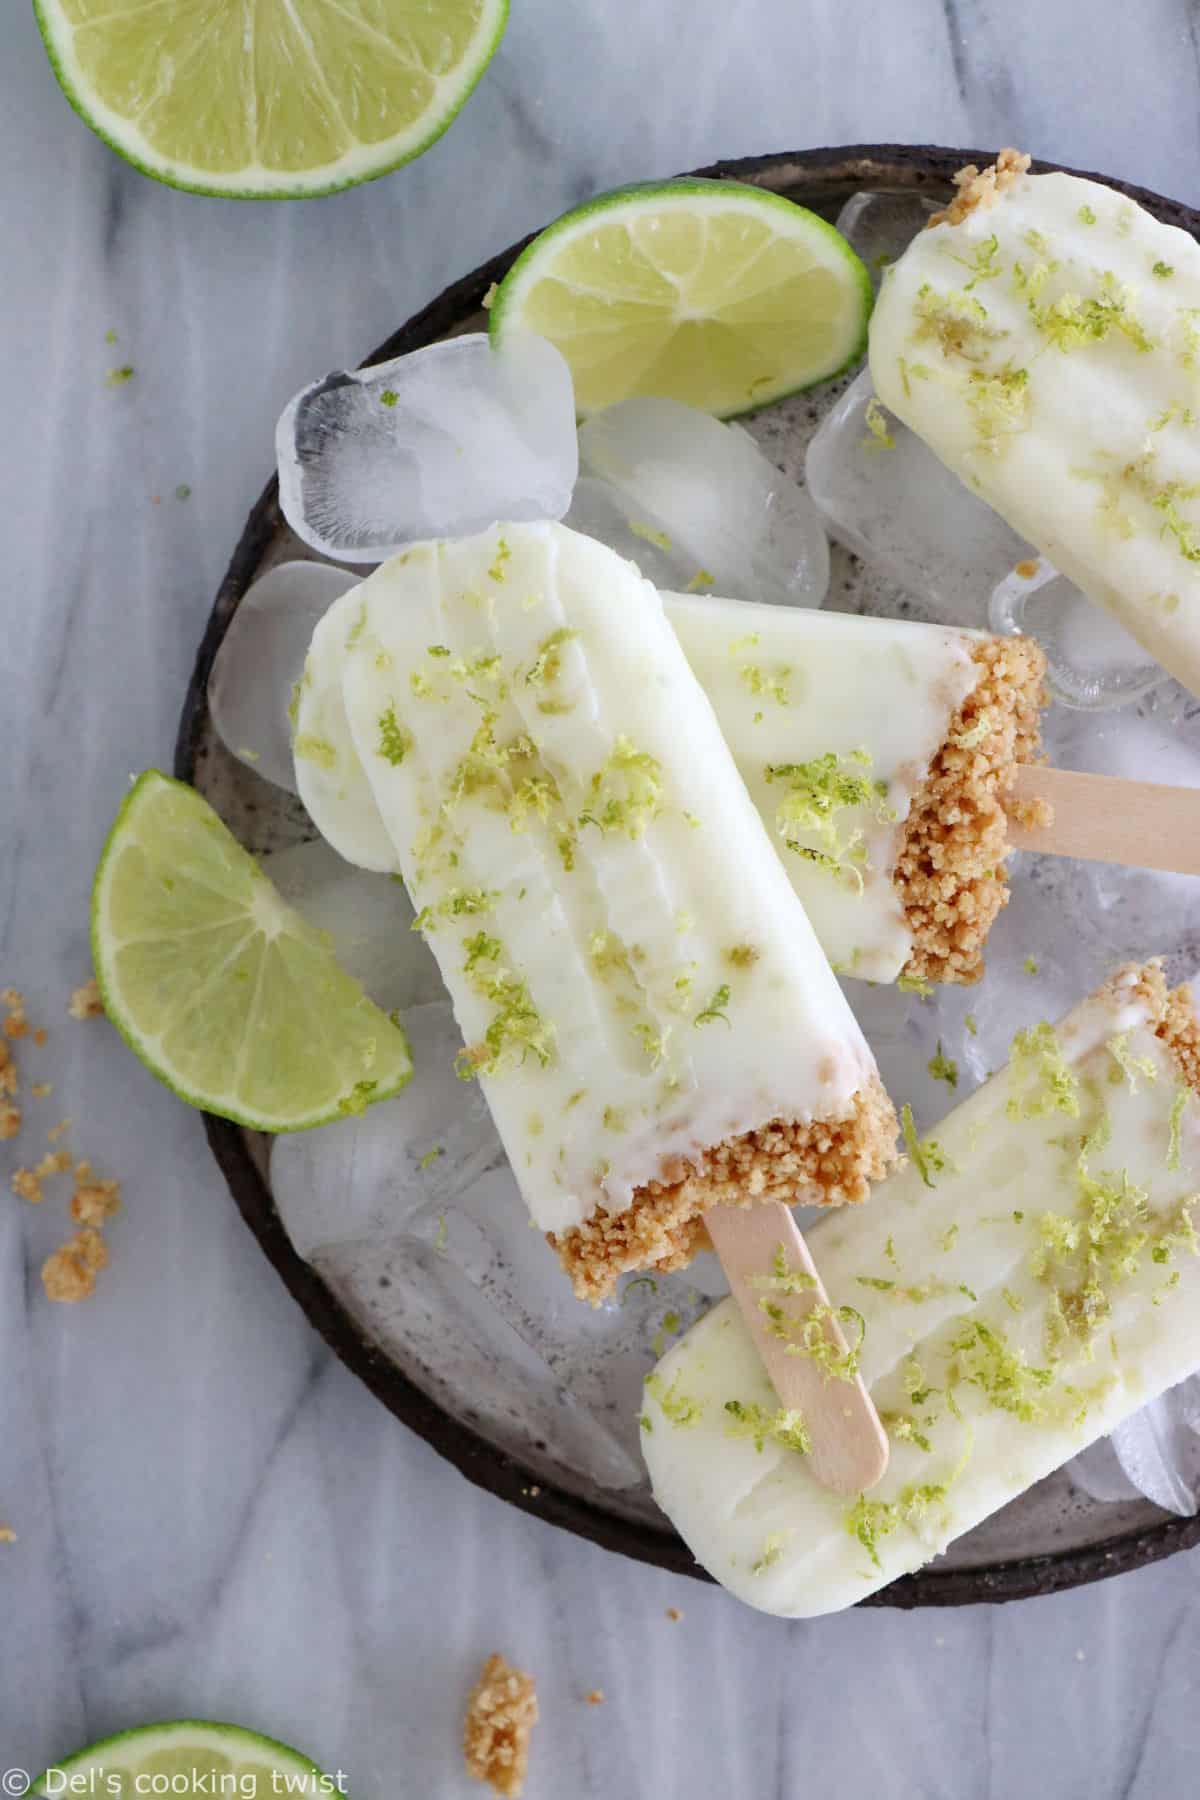 These key lime pie popsicles make the best refreshing summer treat. Quick and super easy to make with 3 main ingredients, they are lightly sweetened and also available in a gluten-free version.